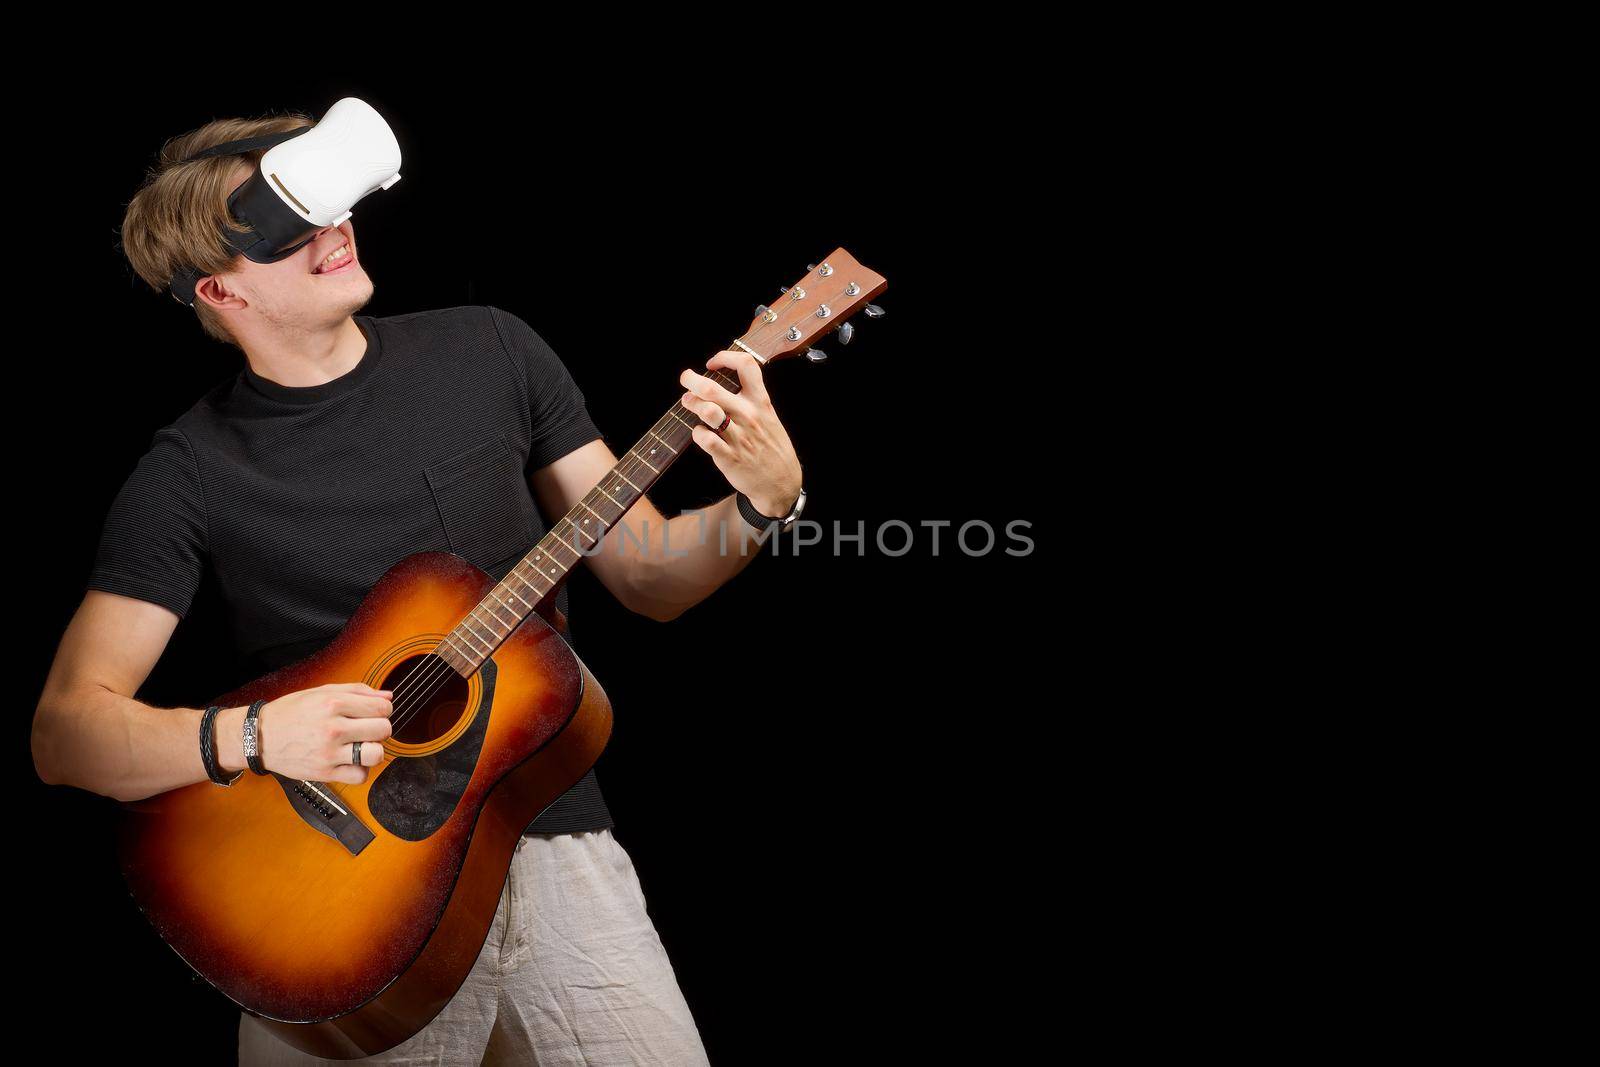 Man playing guitar game in virtual reality helmet. VR goggles, glasses, on black isolated background by PhotoTime